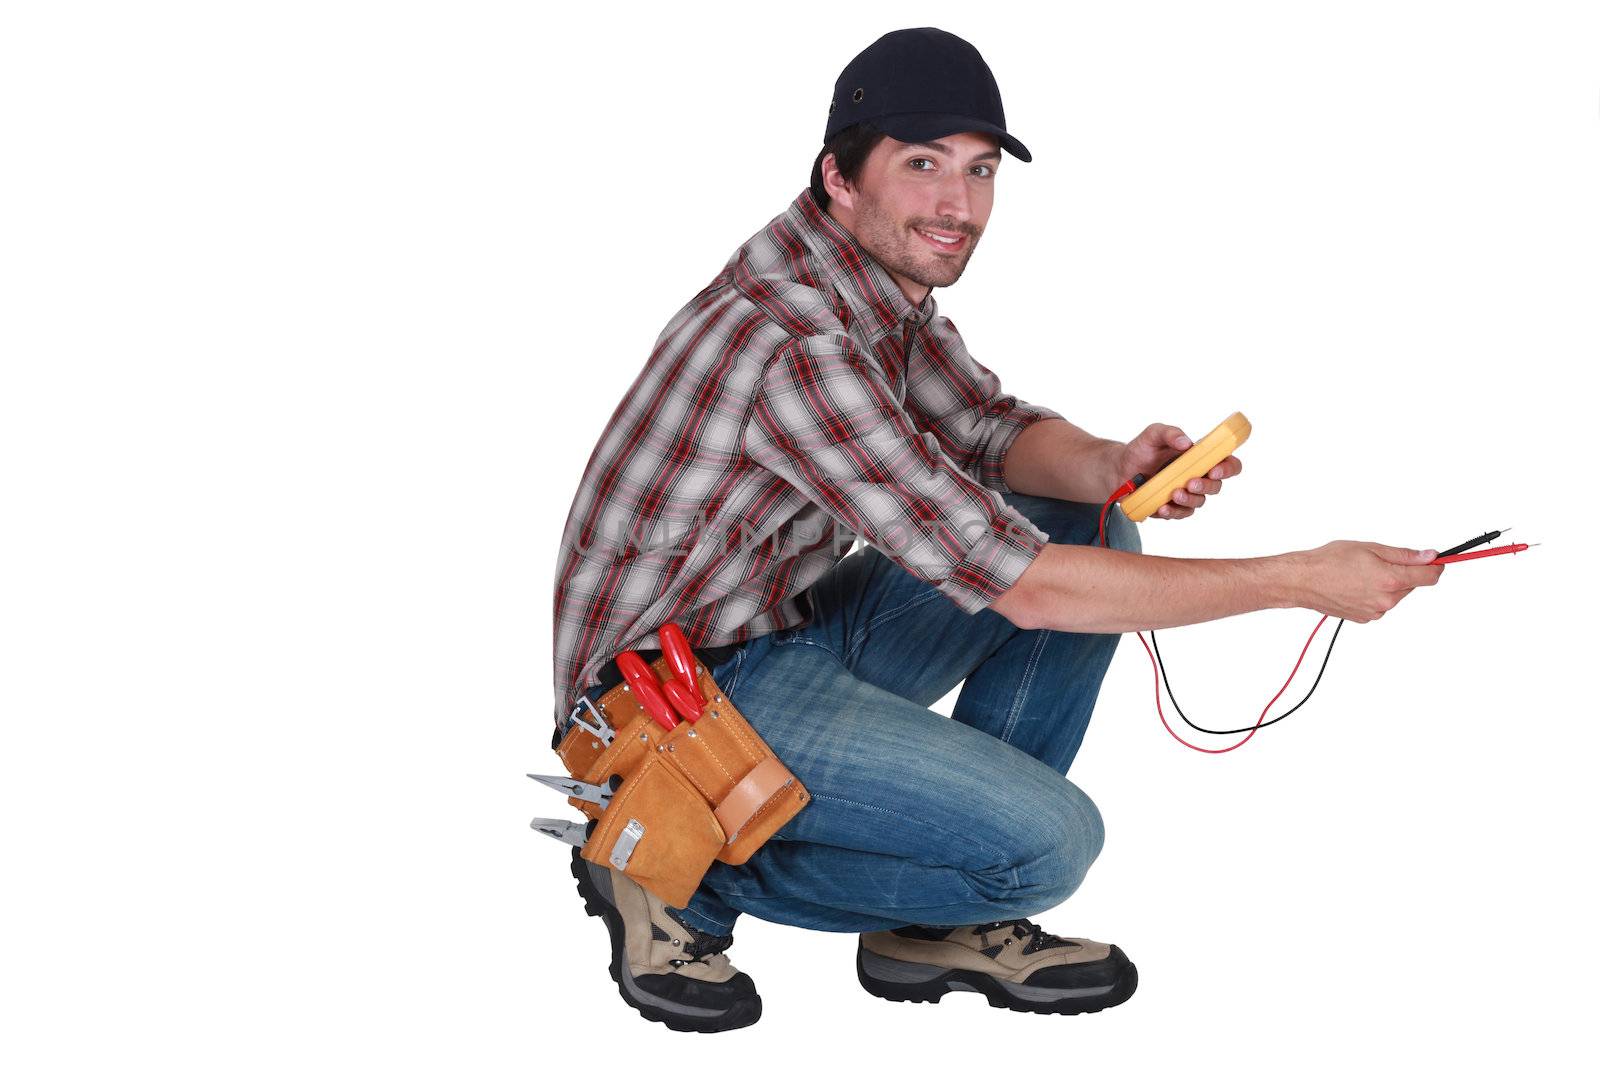 Electrician holding a tool